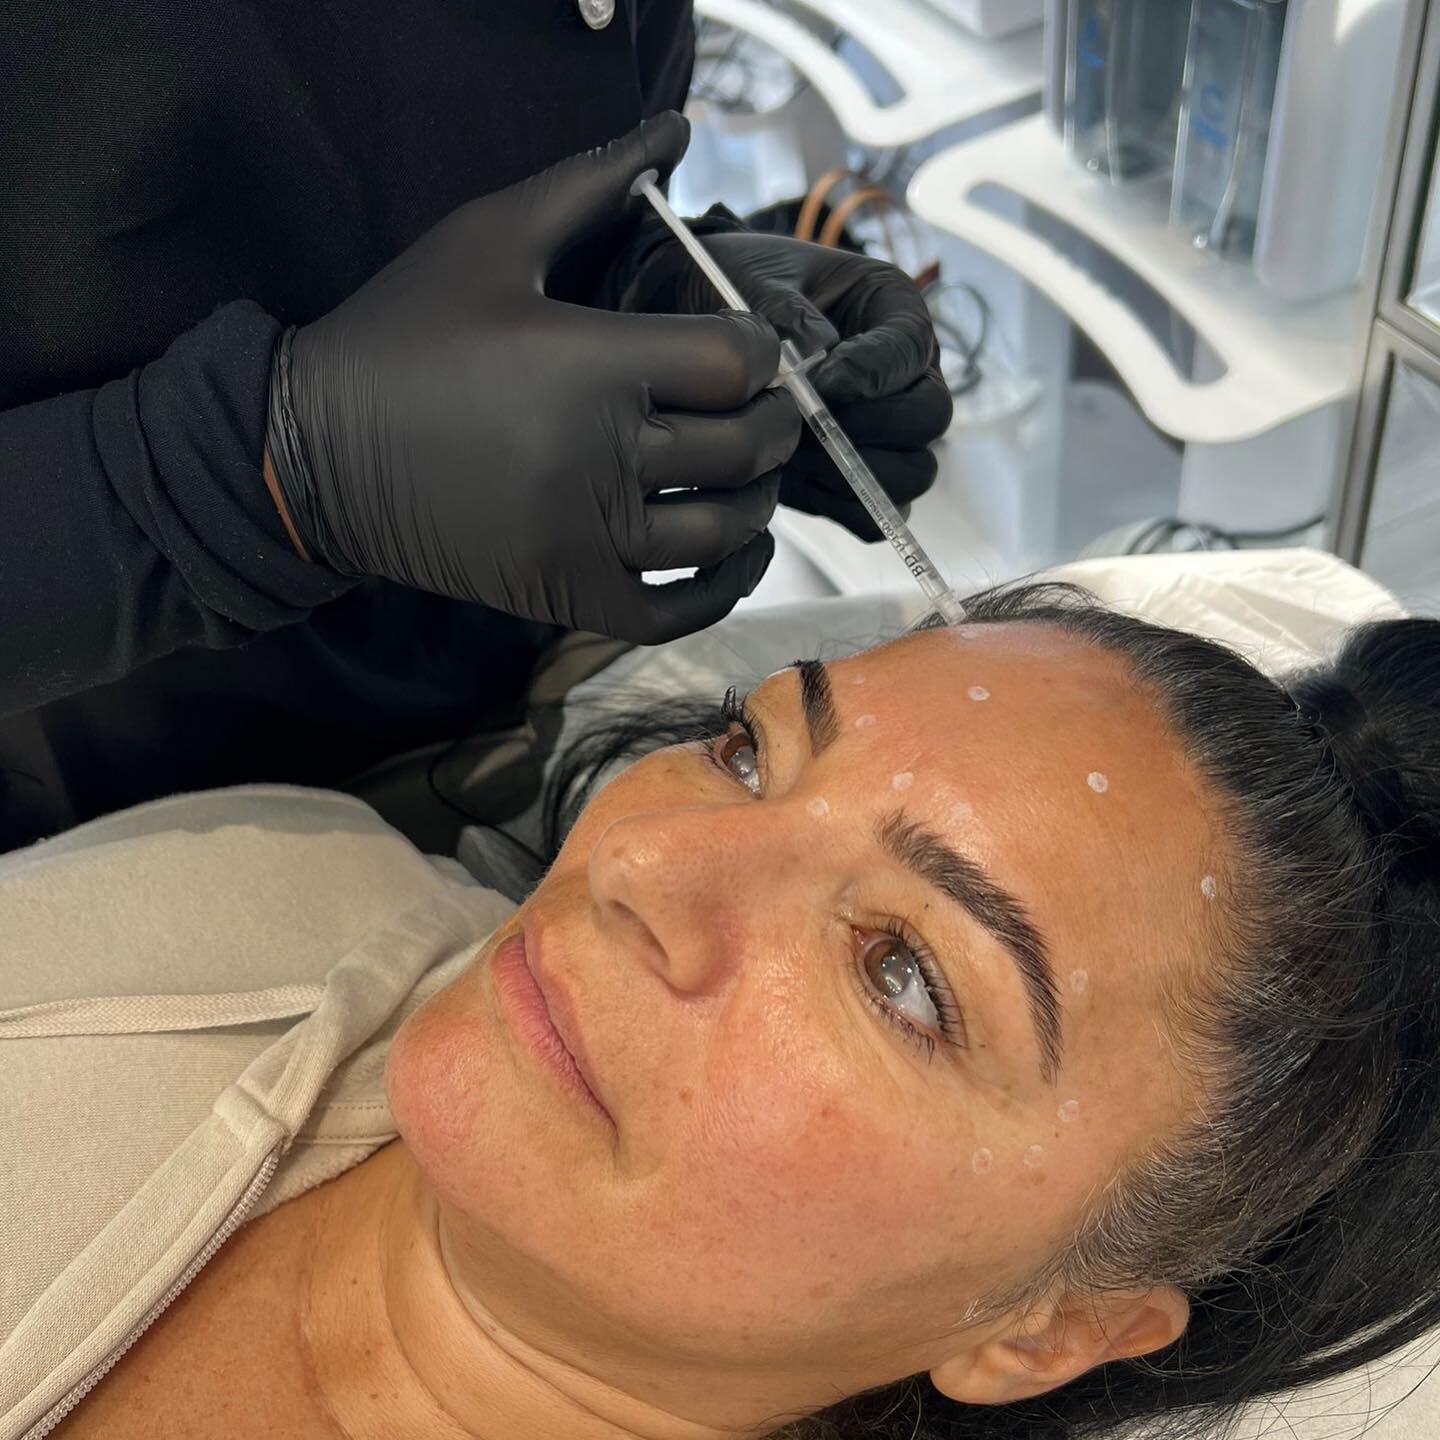 The perfect Sunday? Getting your anti wrinkle topped up 😉💉

🗓️We have Anti Wrinkle appointments available this month! Whether it&rsquo;s your first time or a top up, you can book online 📱 

📲 BOOK your anti wrinkle treatment 
💻 Link in bio 
💞 